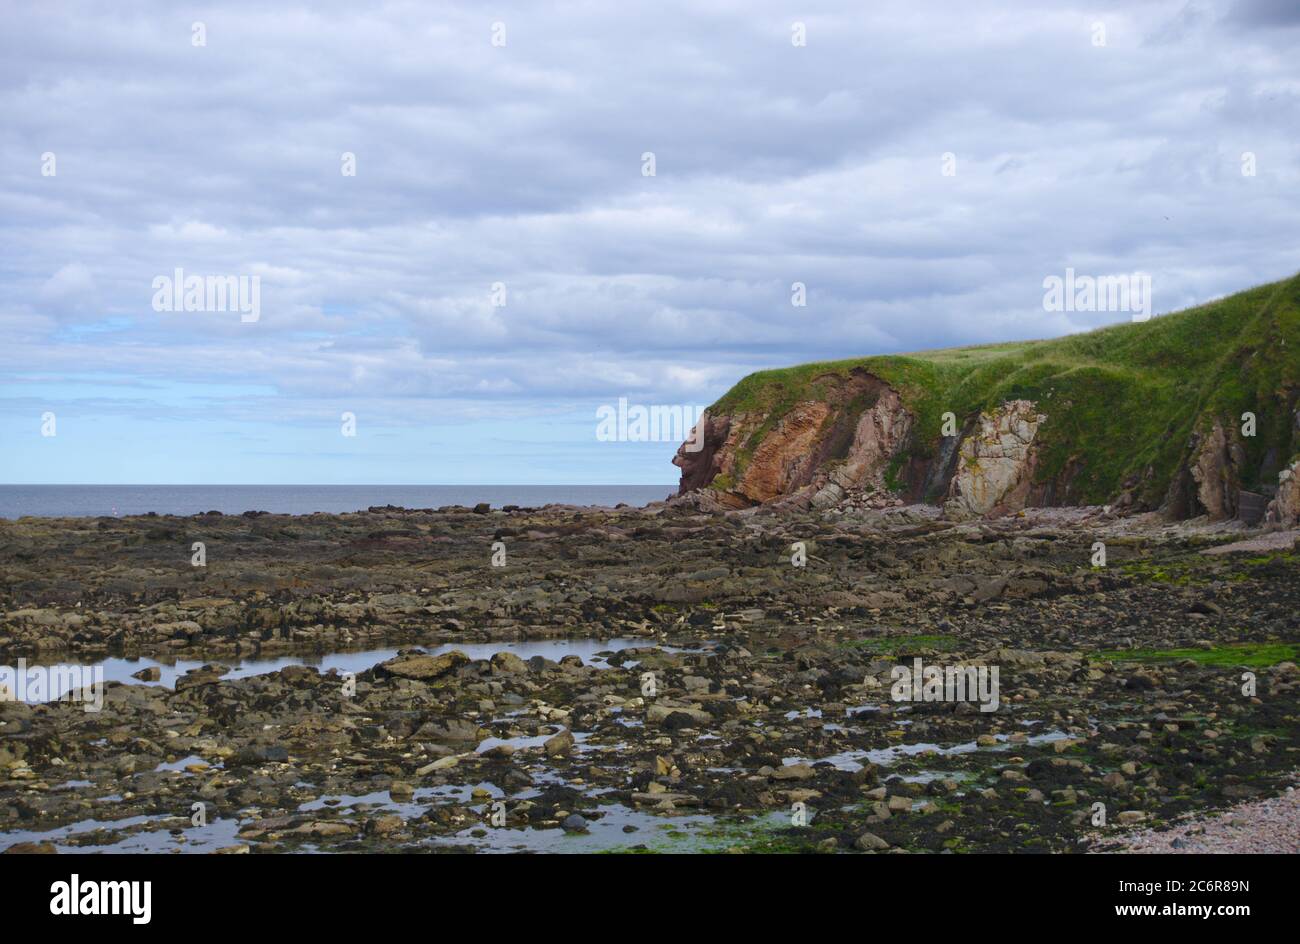 View from Cowdrait (part of Lower Burnmouth, Berwickshire, Scotland) across the rocky shore to the North Sea. Stock Photo